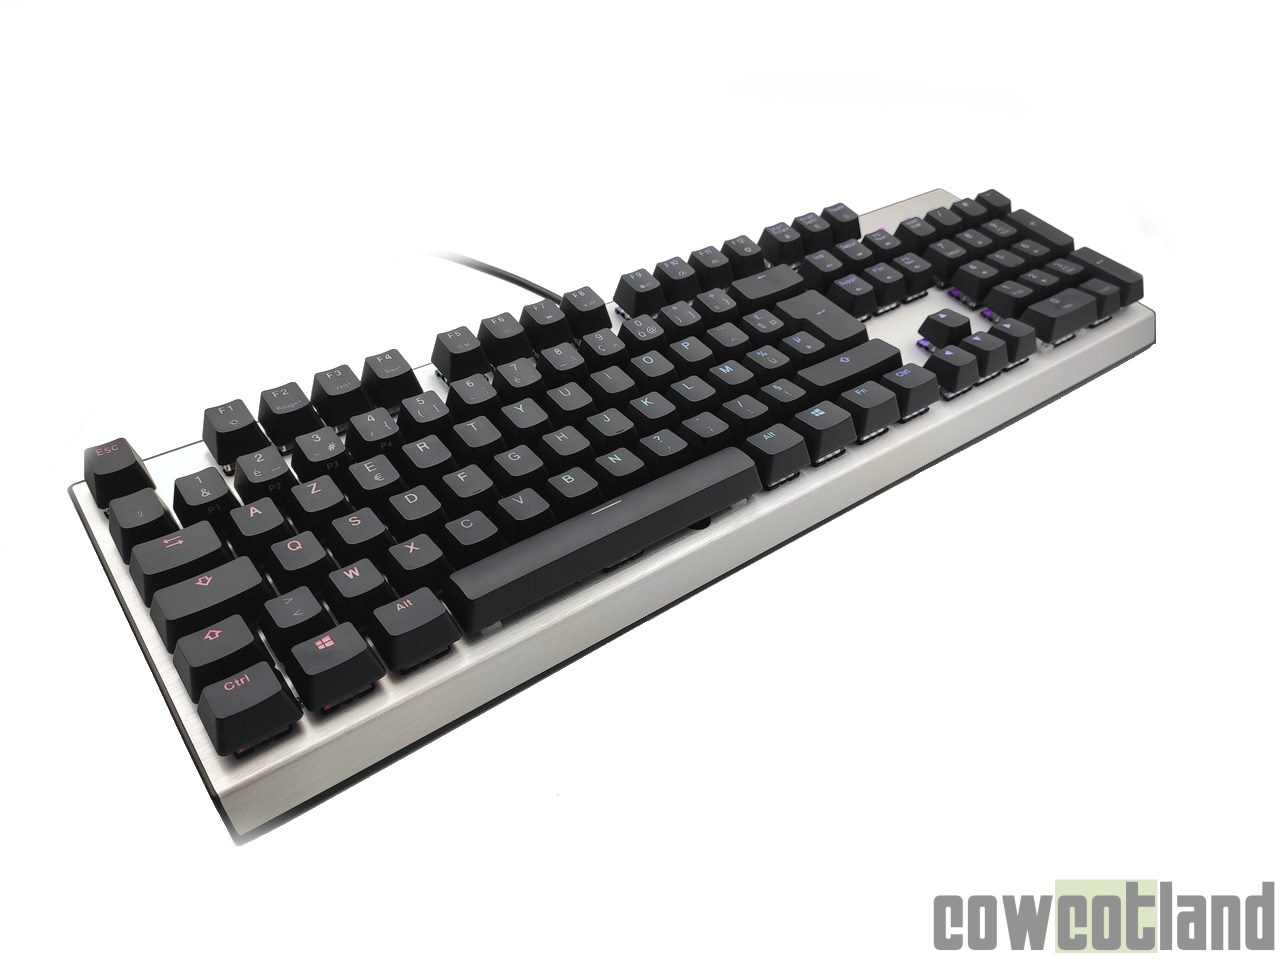 Image 46358, galerie Test clavier mcanique Cooler Master CK351 : switches optiques et hot-swappables !